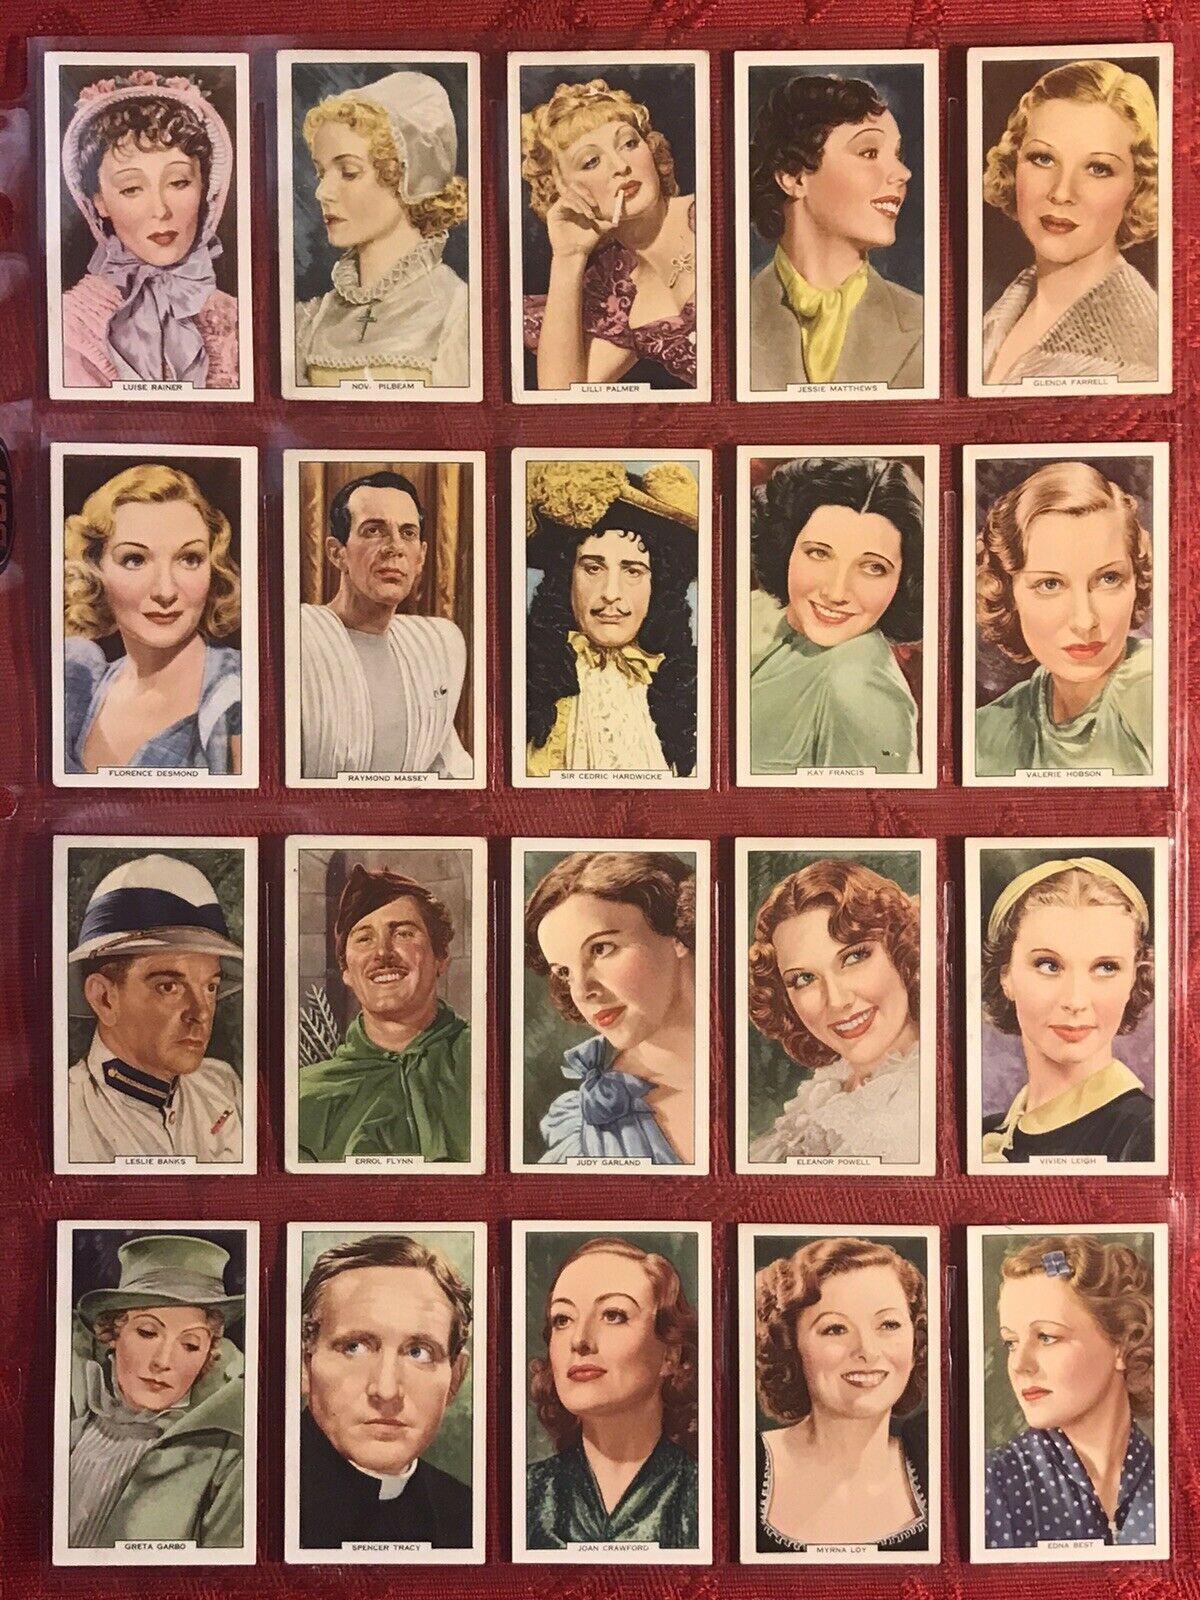 1939 GALLAHER-MY FAVOURITE PART-FILM STARS-COMPLETE 48 CARD SET-VG+EXCELLENT